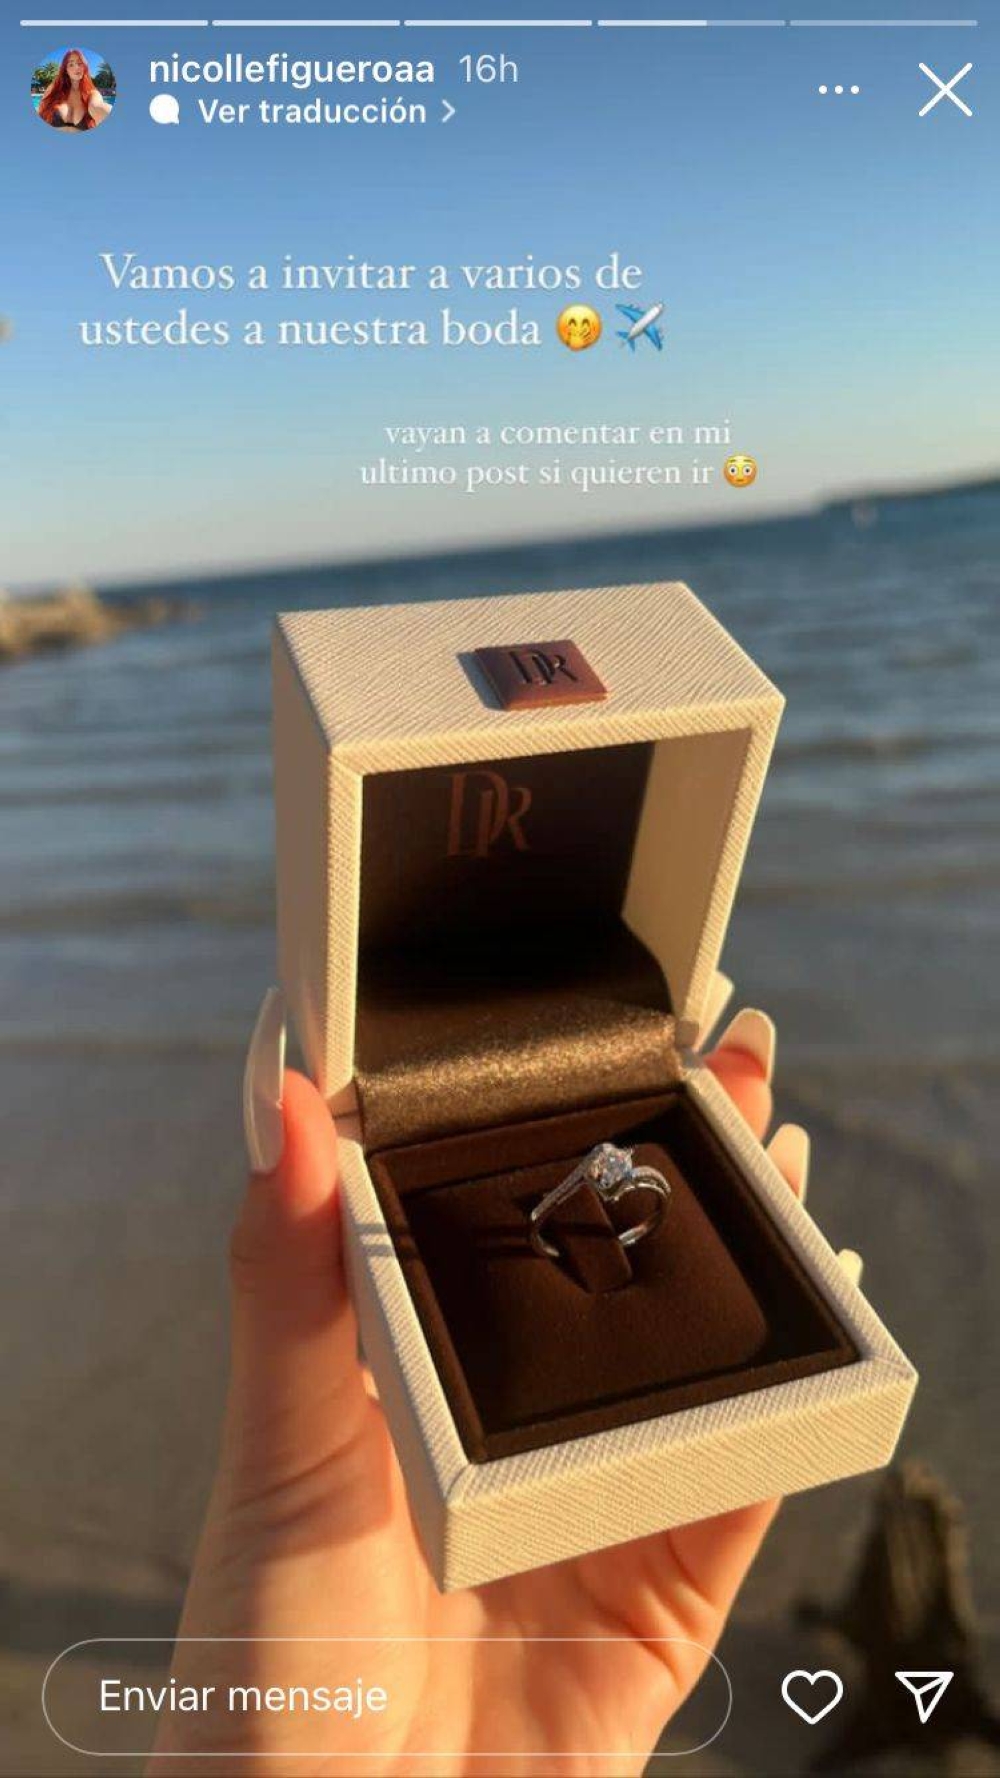 Santaneka didn't hesitate to show off her engagement ring in her stories.